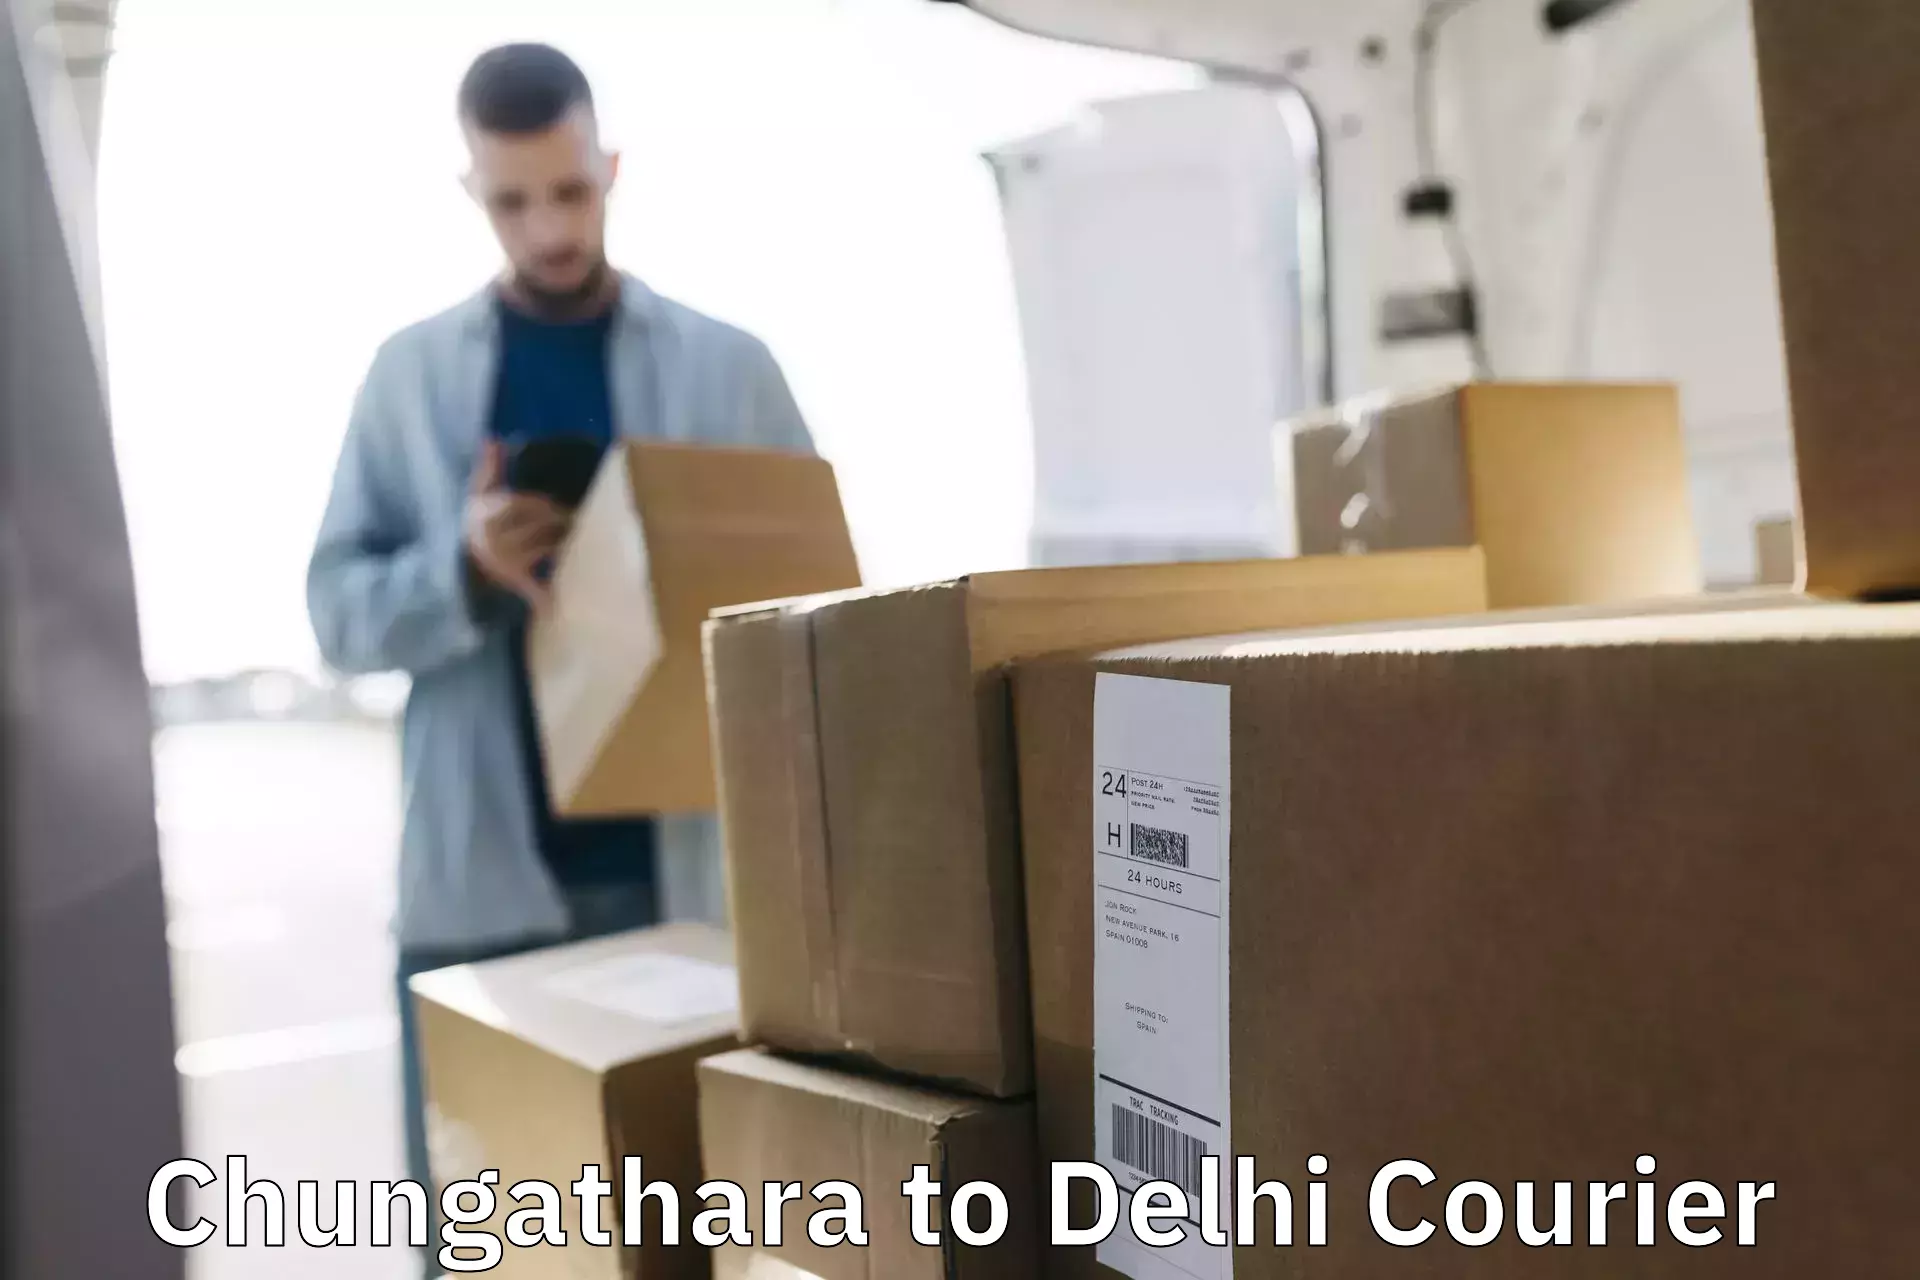 Multi-national courier services Chungathara to East Delhi